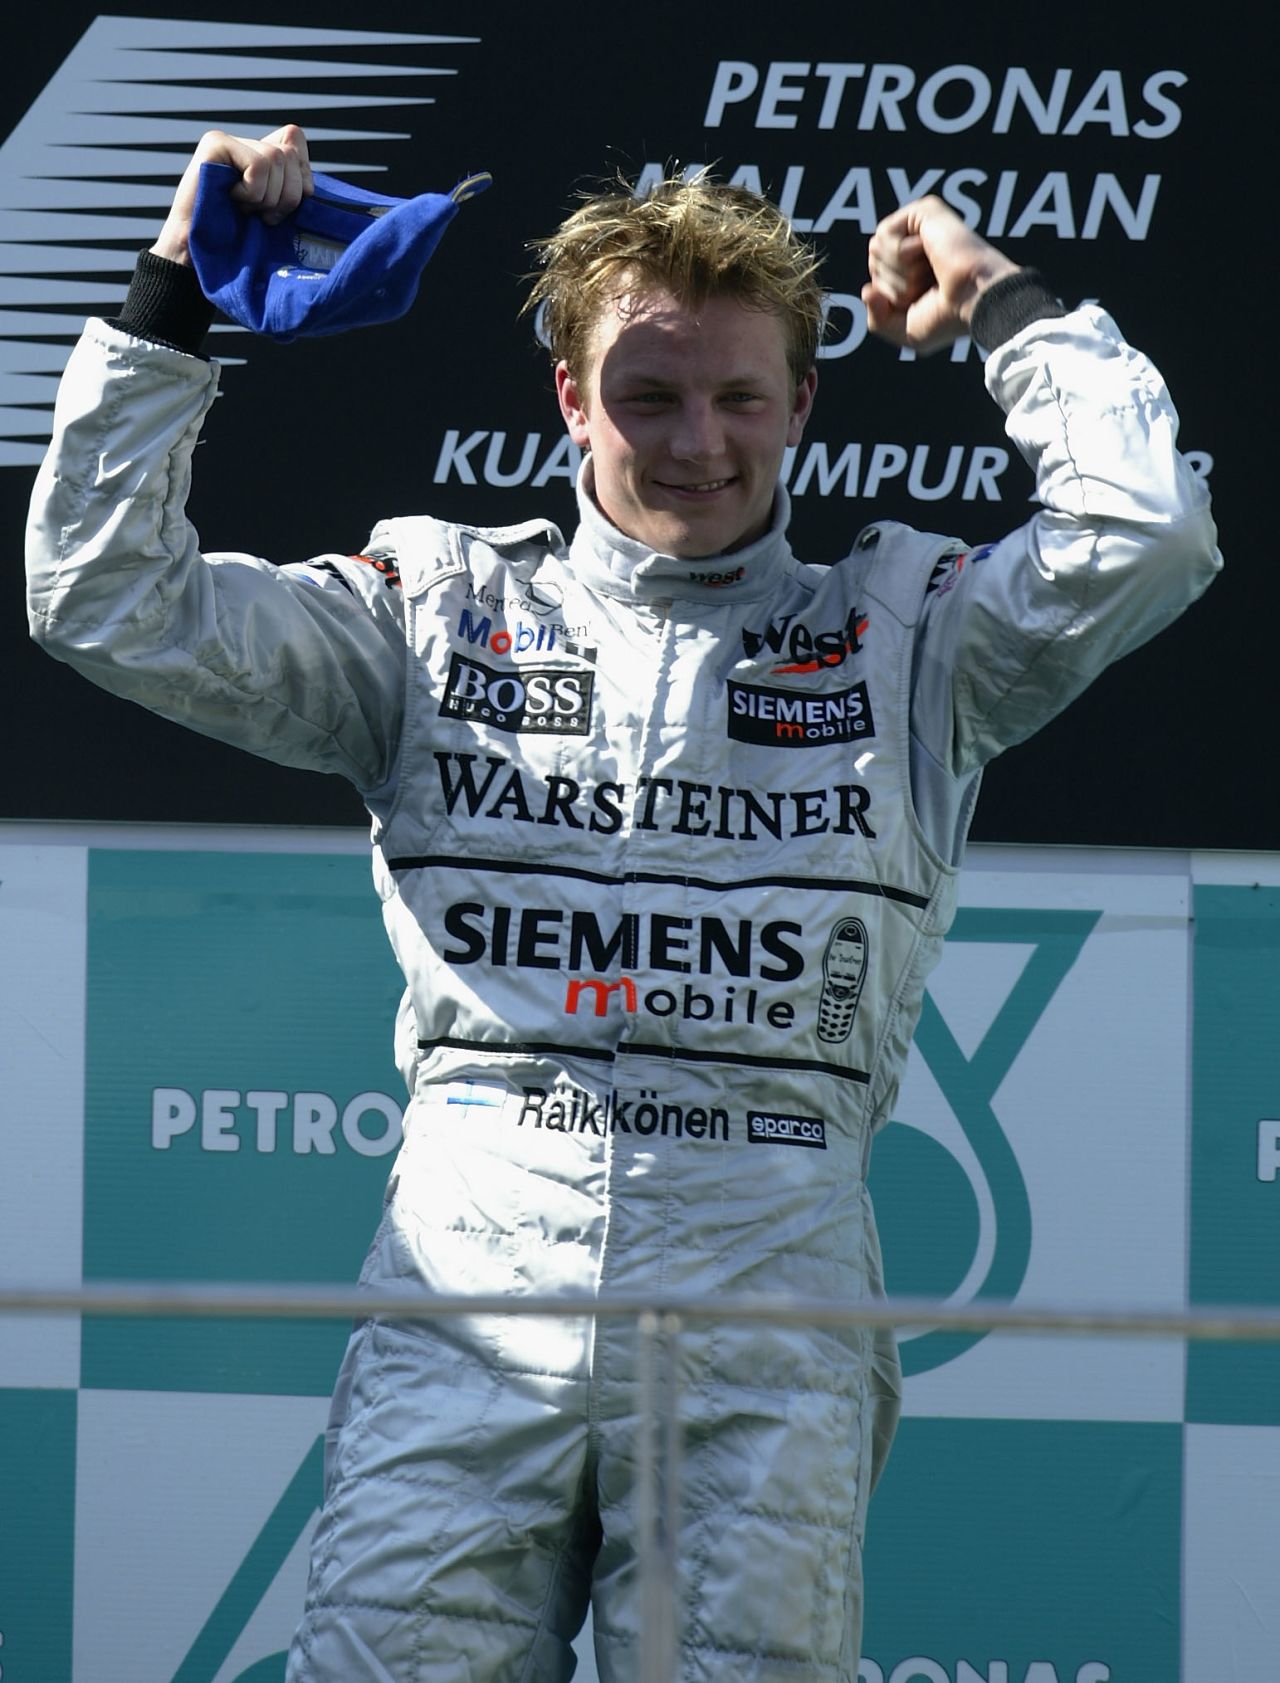 Raikkonen celebrates his maiden grand prix win in Malaysia in 2003. He had moved to McLaren, where he would spend five years, twice finishing as runner-up in the drivers' championship.